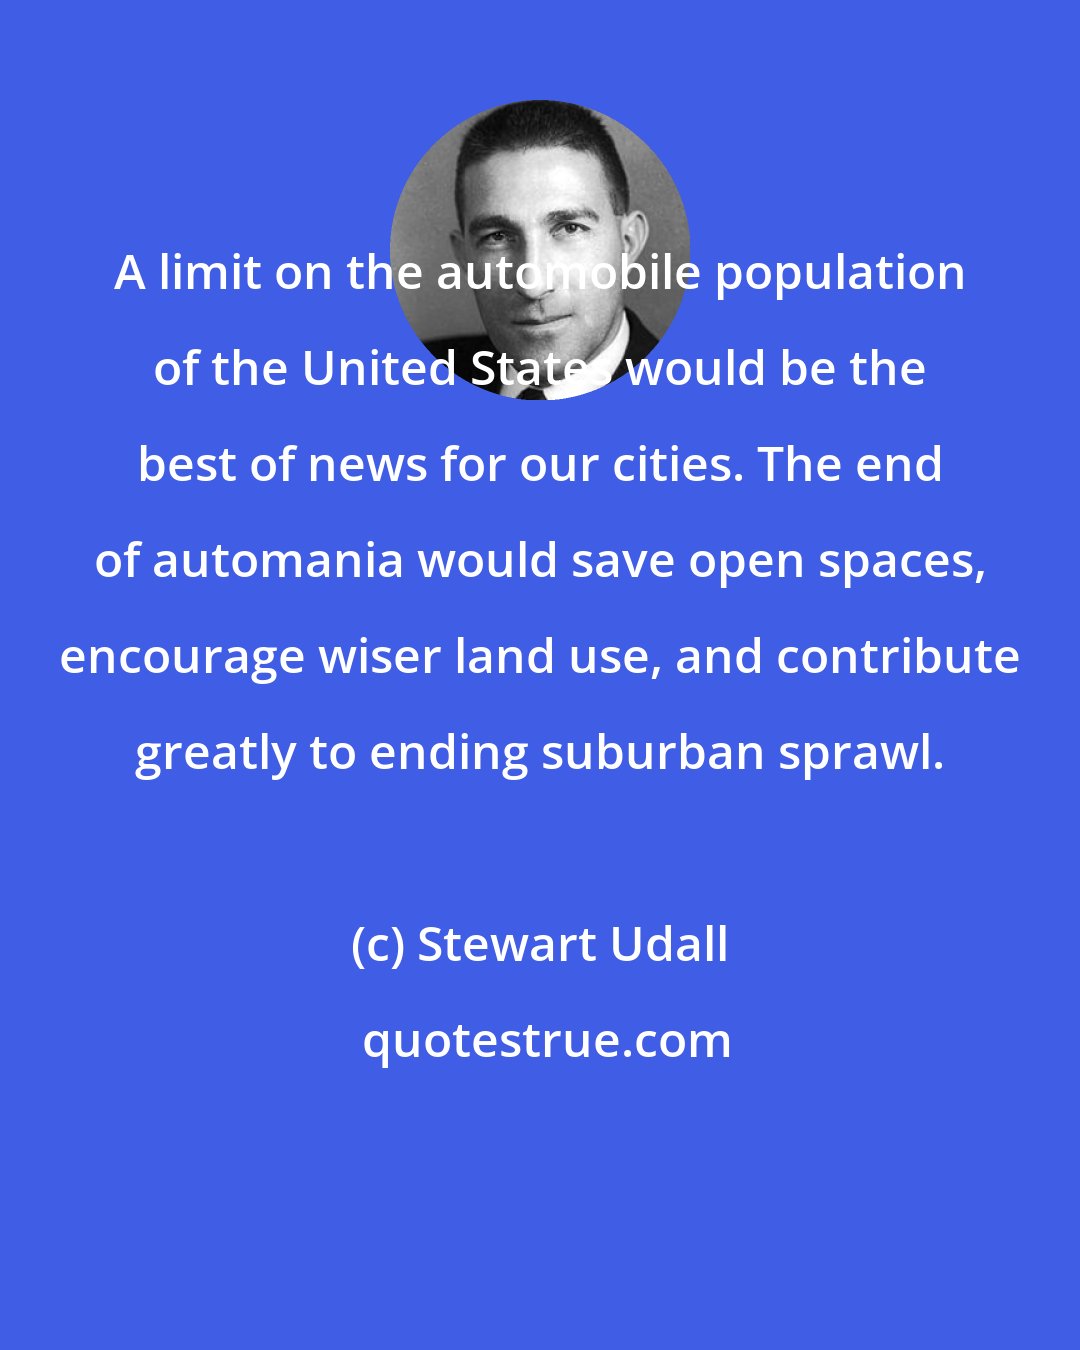 Stewart Udall: A limit on the automobile population of the United States would be the best of news for our cities. The end of automania would save open spaces, encourage wiser land use, and contribute greatly to ending suburban sprawl.